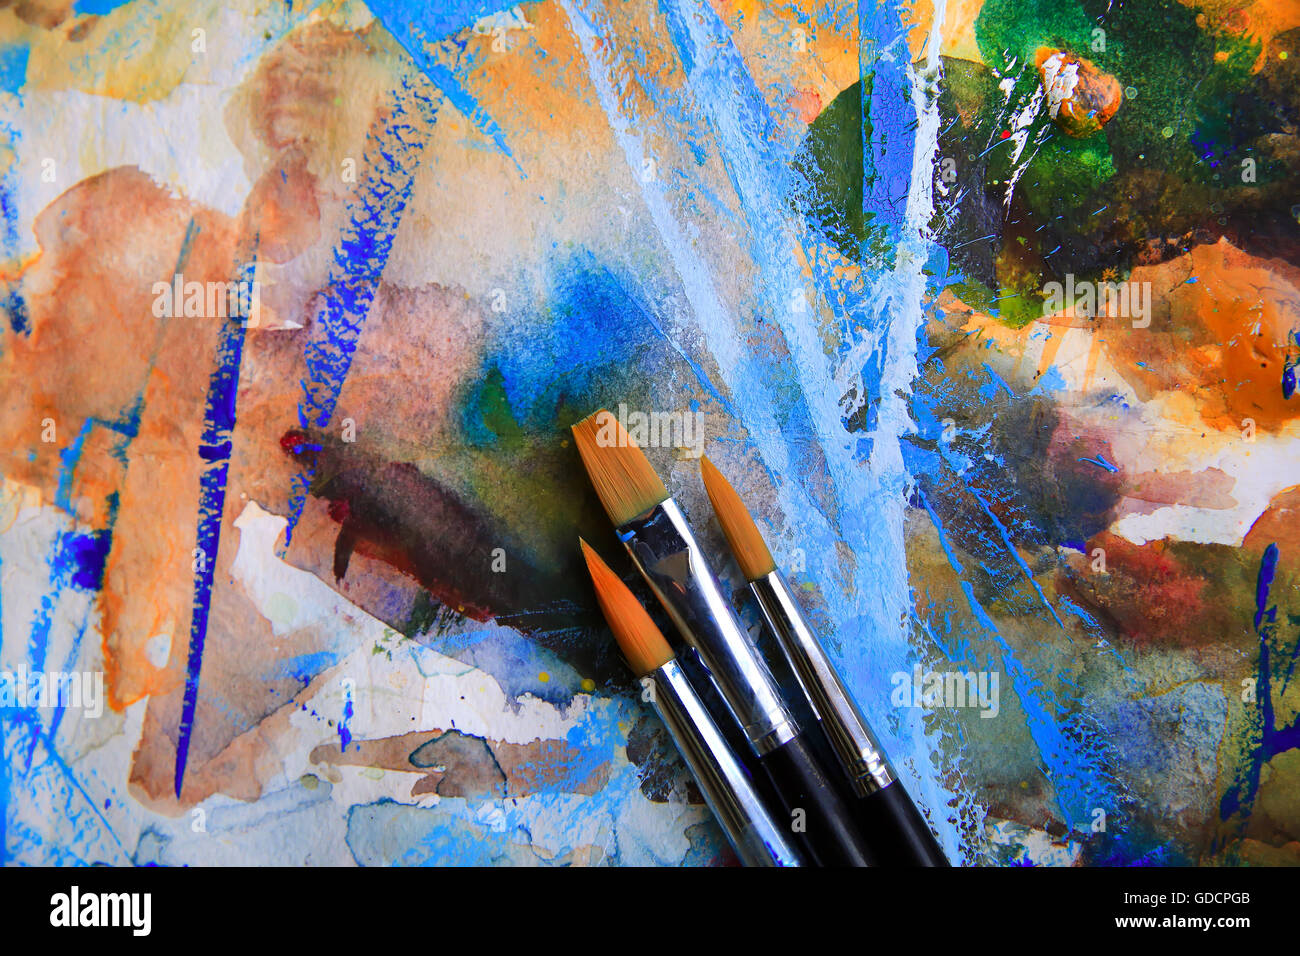 Closeup of brushes and palette. Stock Photo